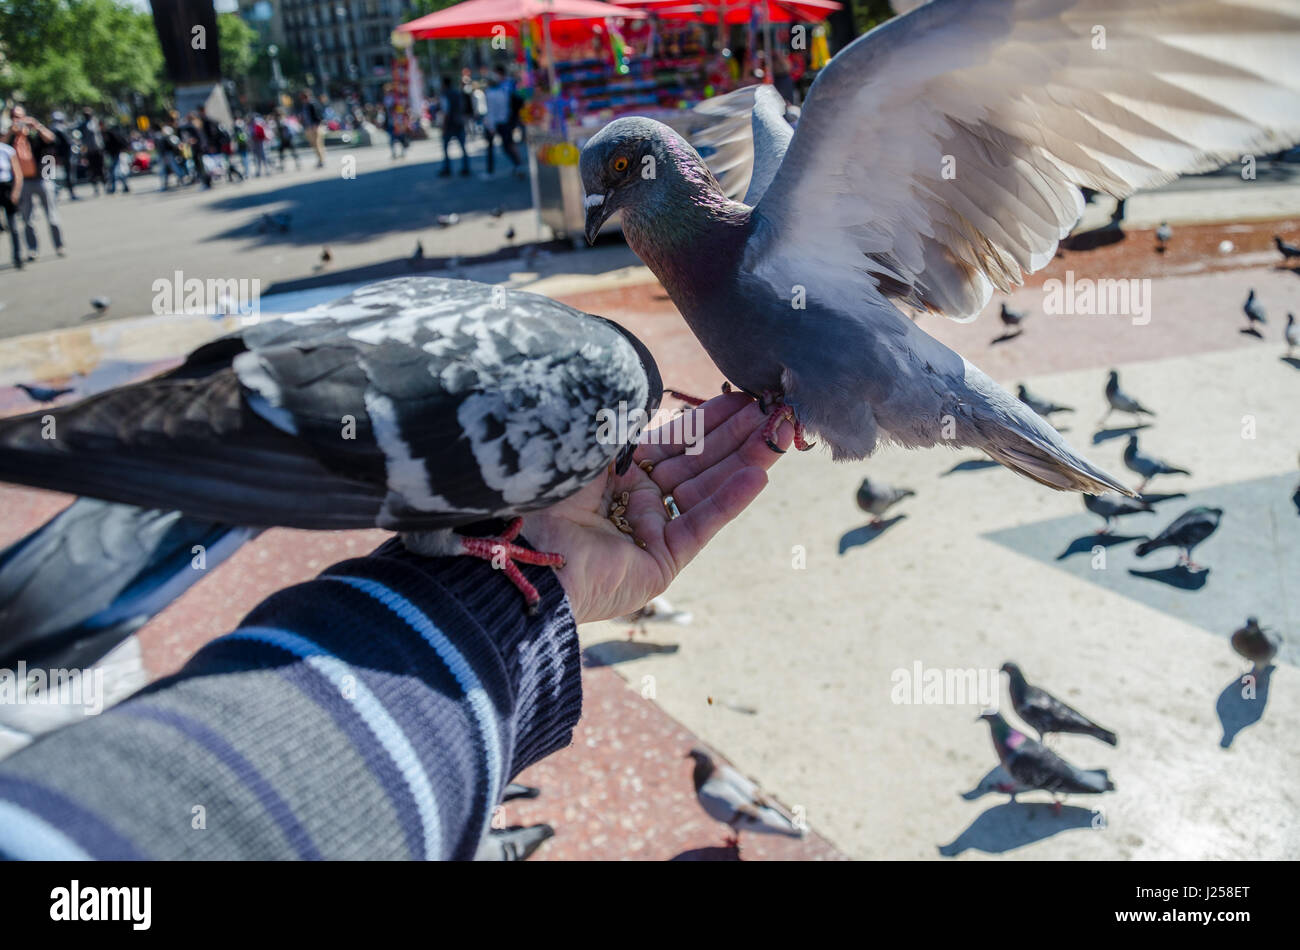 Pigeons eating bird seed from the hand in Plaça de Catalunya in the centre of Barcelona. Stock Photo